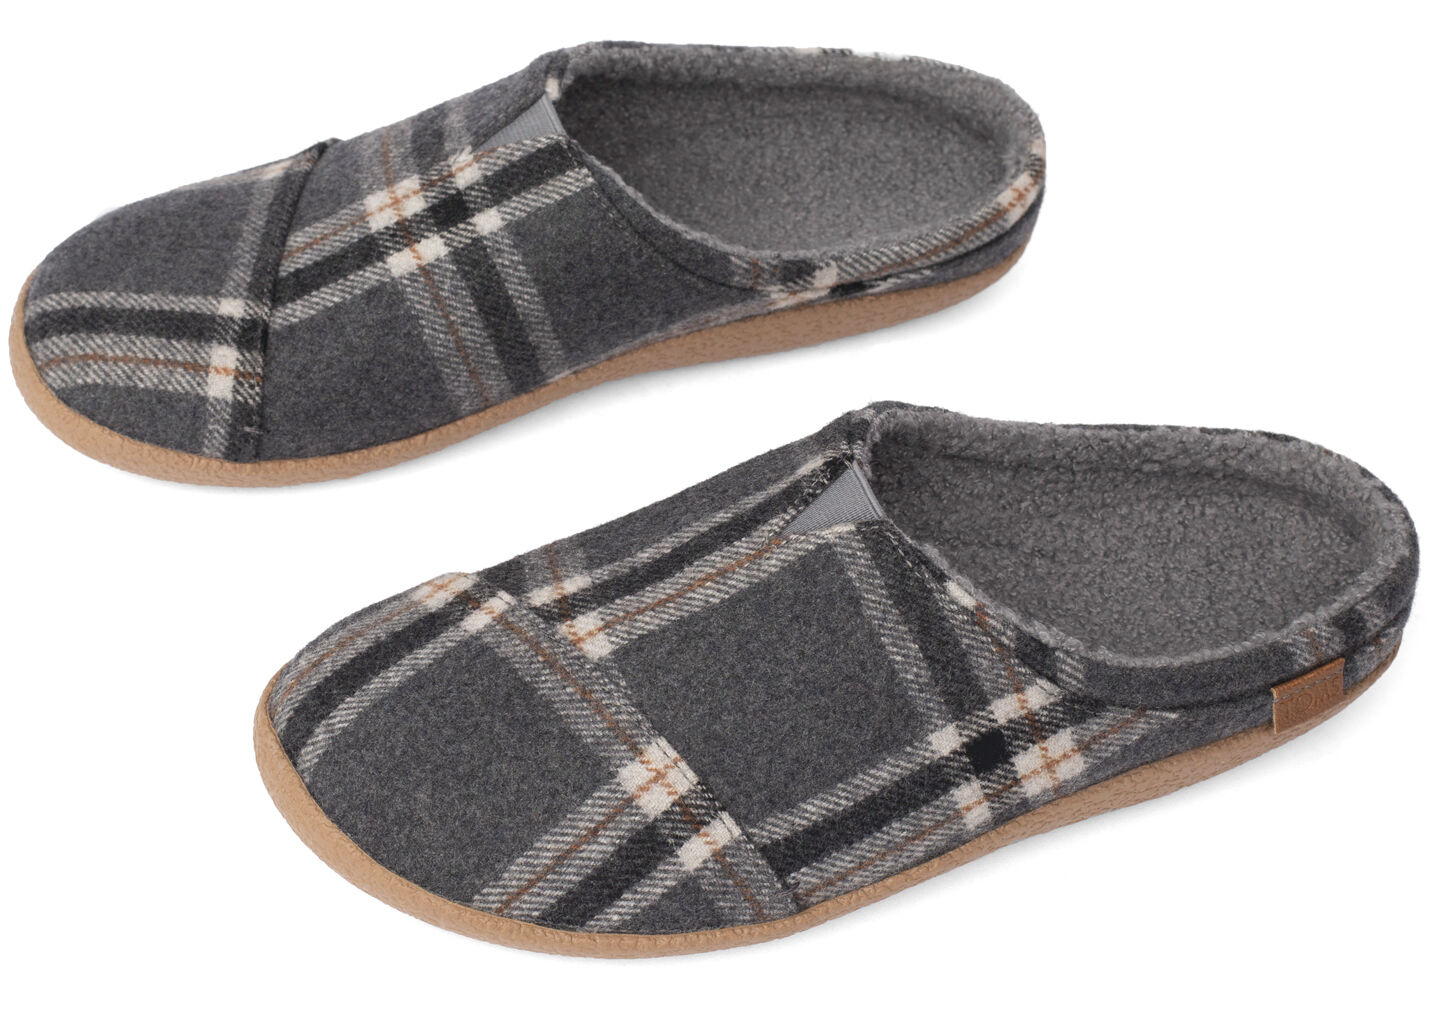 toms slippers mens